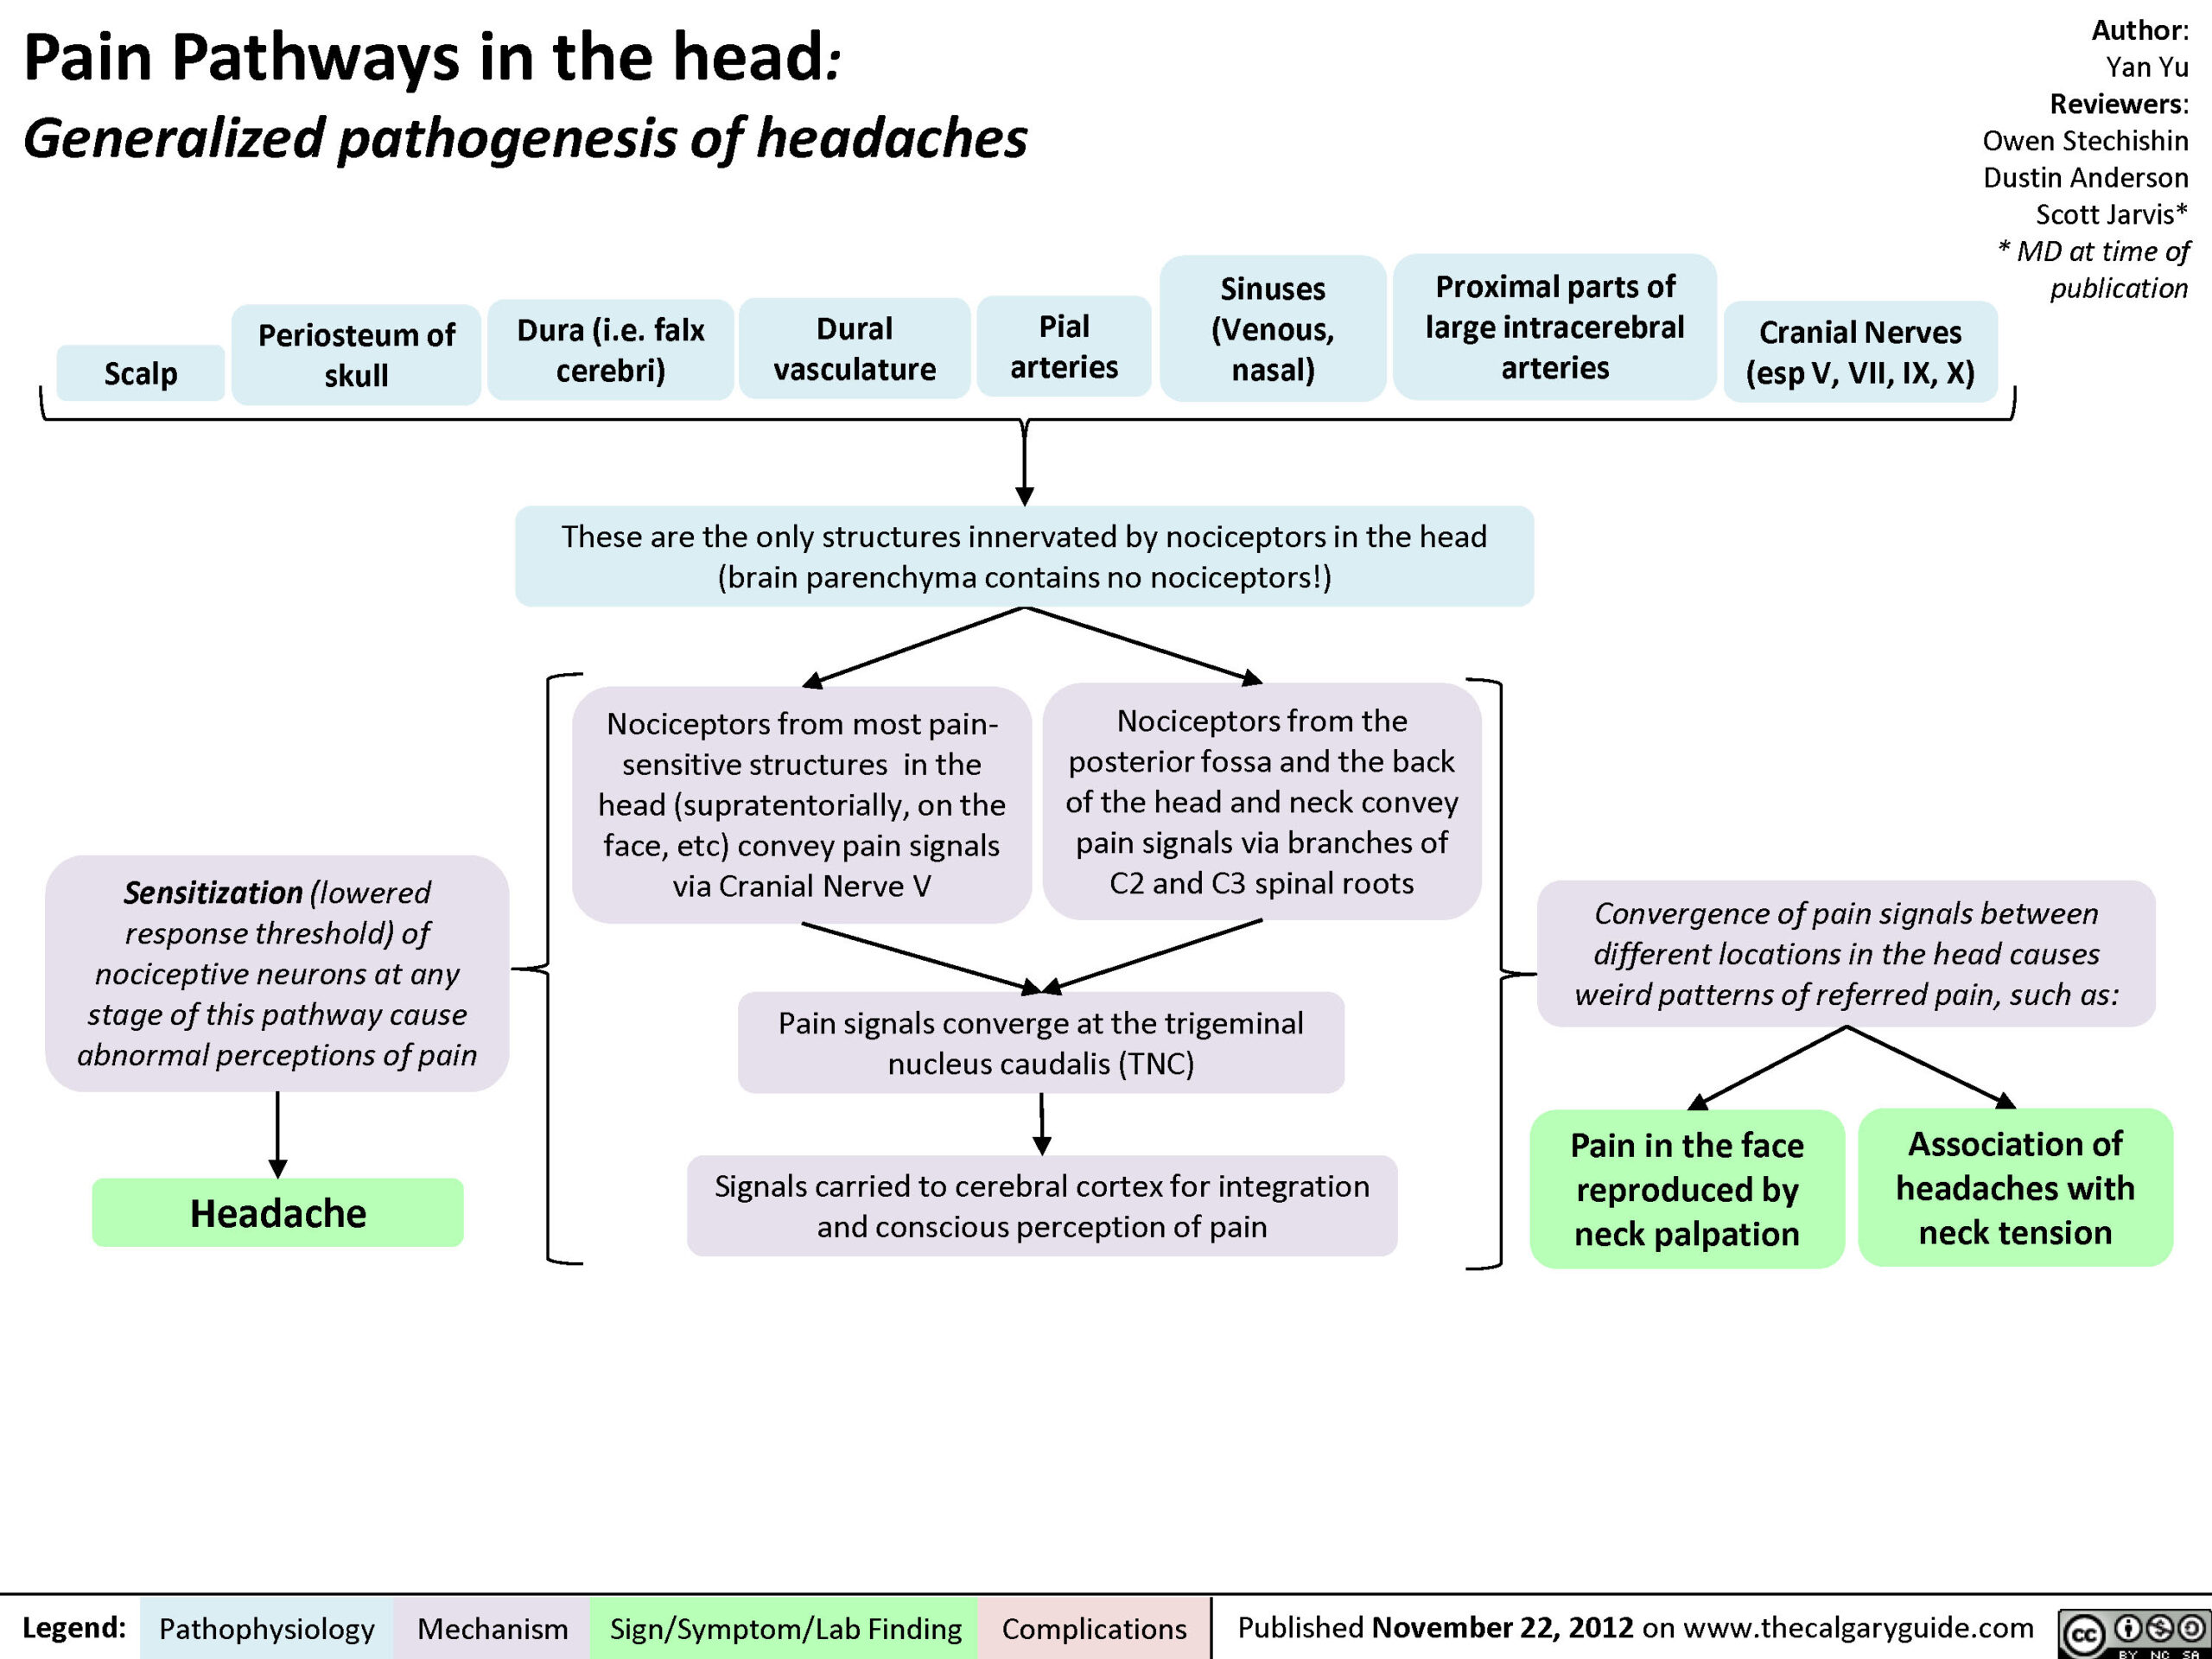 Pain pathways in the head